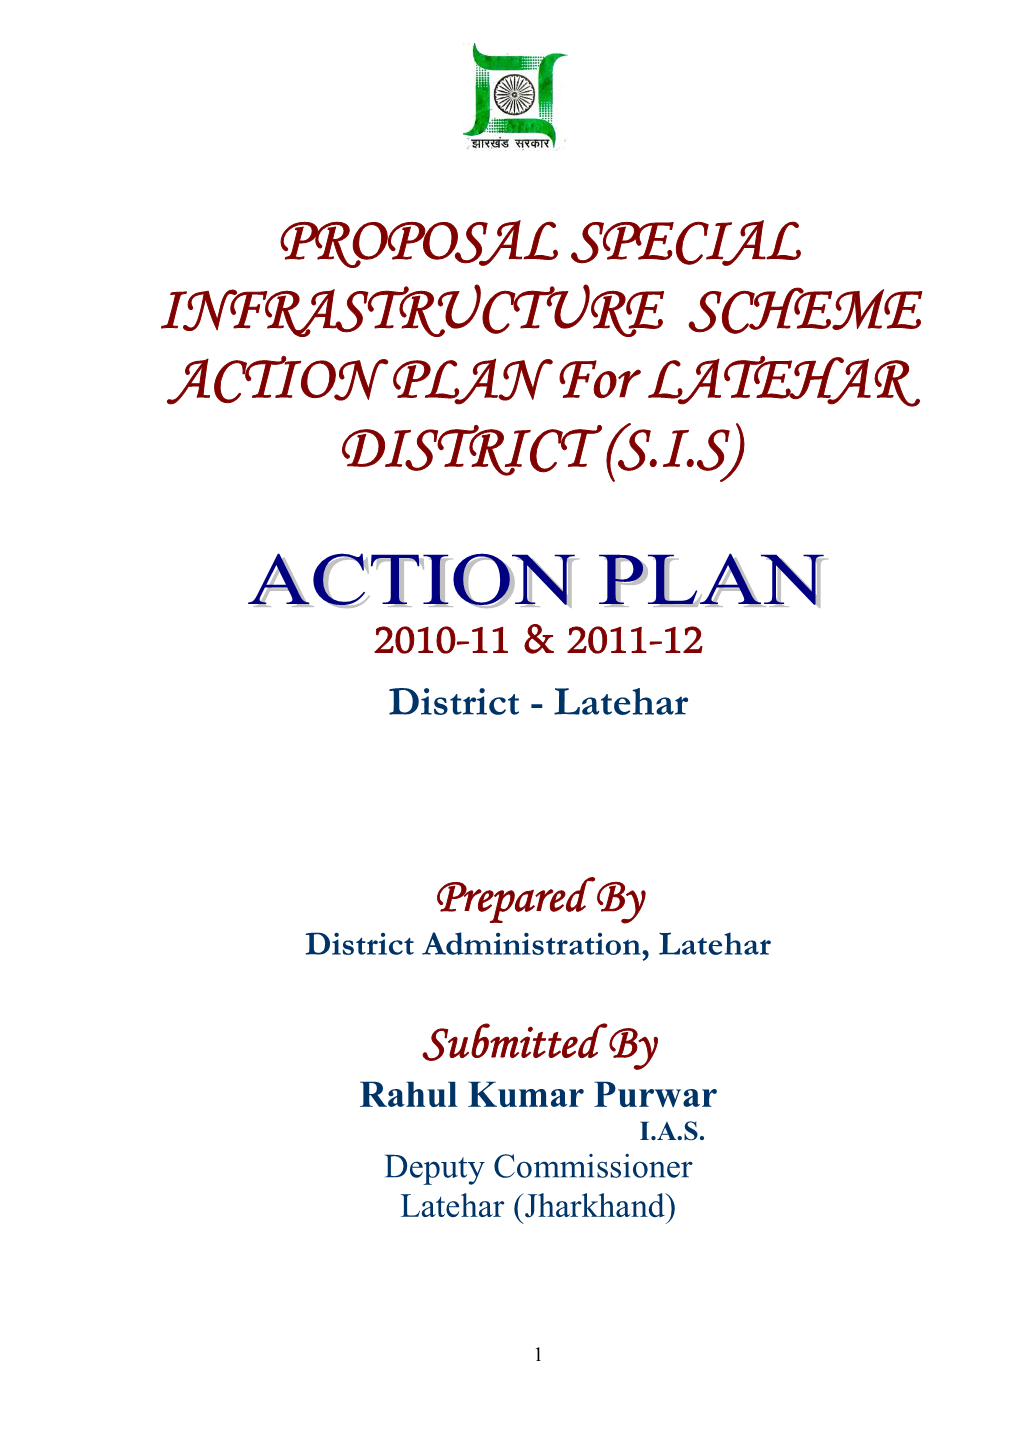 PROPOSAL SPECIAL INFRASTRUCTURE SCHEME ACTION PLAN for LATEHAR DISTRICT (S.I.S)